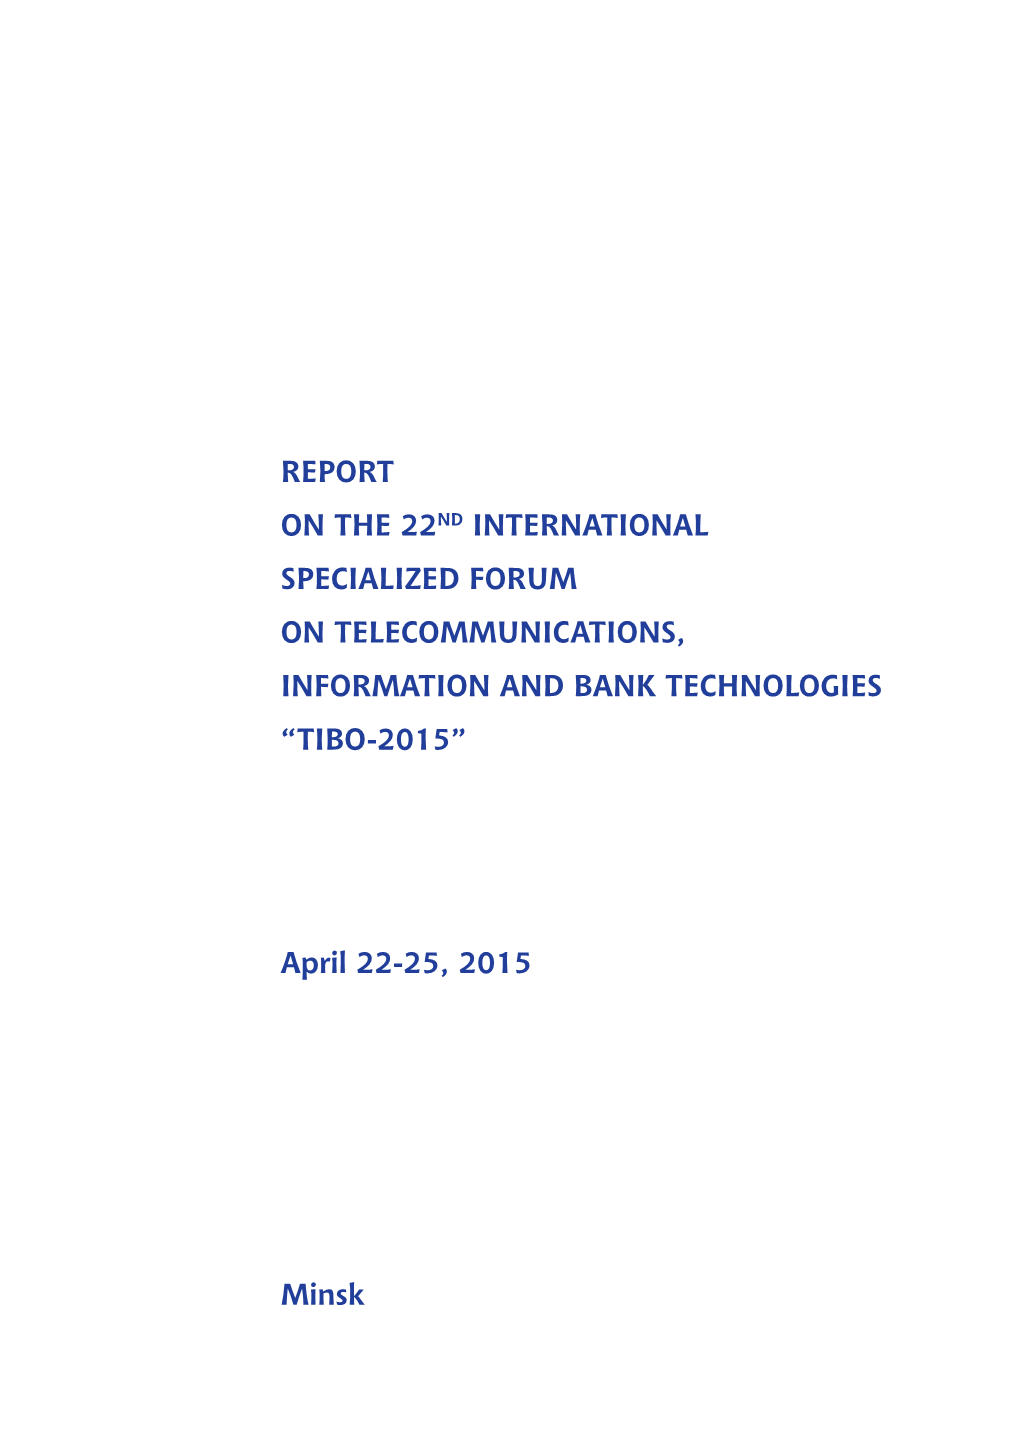 REPORT on the 22Nd INTERNATIONAL SPECIALIZED FORUM on TELECOMMUNICATIONS, INFORMATION and BANK TECHNOLOGIES “TIBO-2015”